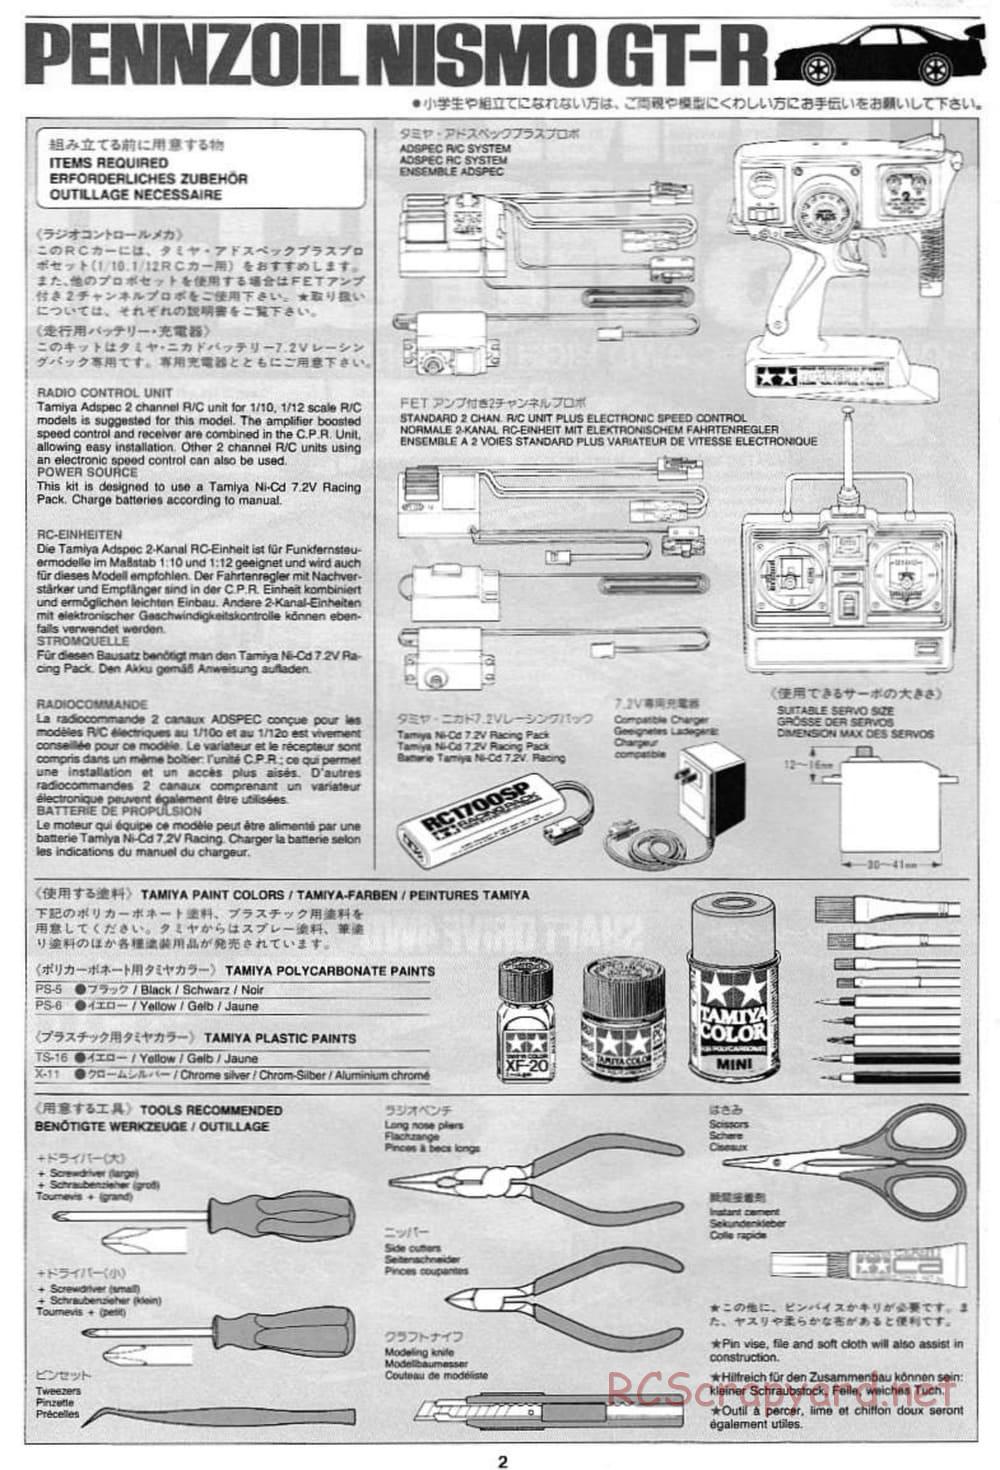 Tamiya - Pennzoil Nismo GT-R - TL-01 Chassis - Manual - Page 2